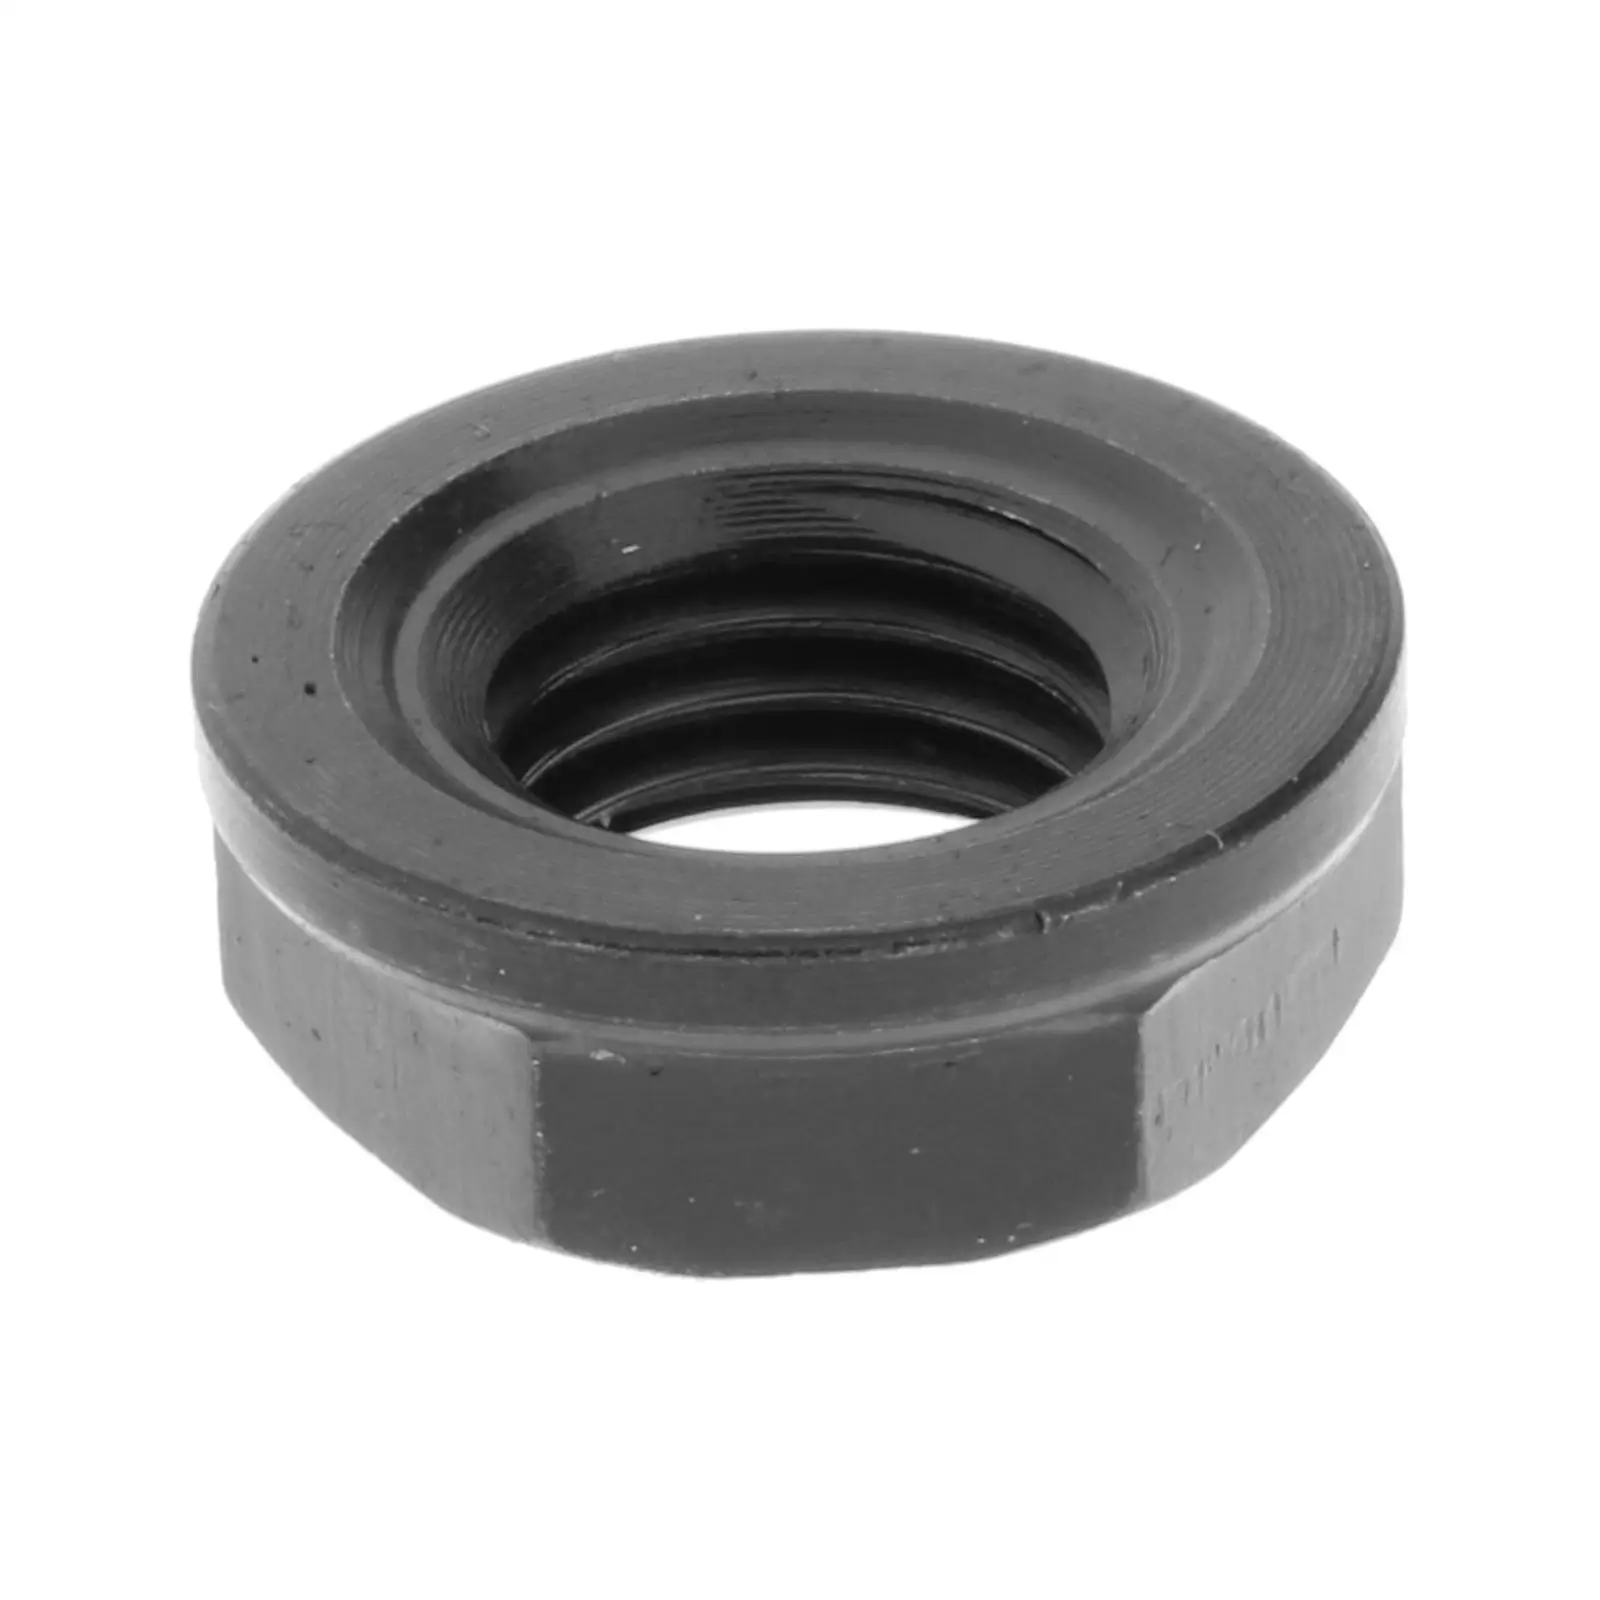 Driver Shaft Nut Suitable for Yamaha Parts Durable Easy and Convenient to Install and Use